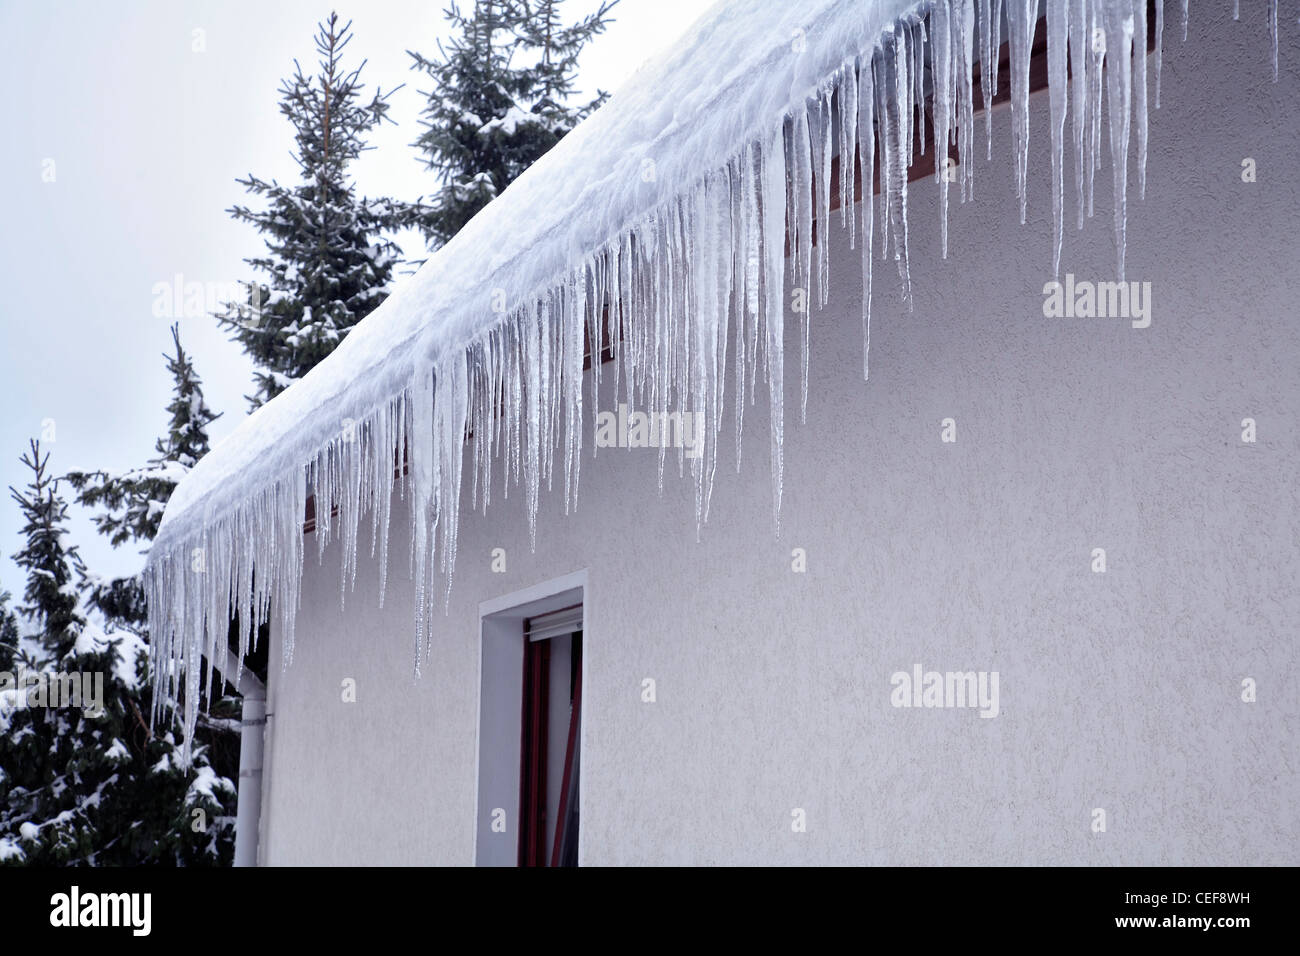 Icicles hanging from a snow covered roof. Oberbergisches Land, North-Rhine Westphalia, Germany. Stock Photo